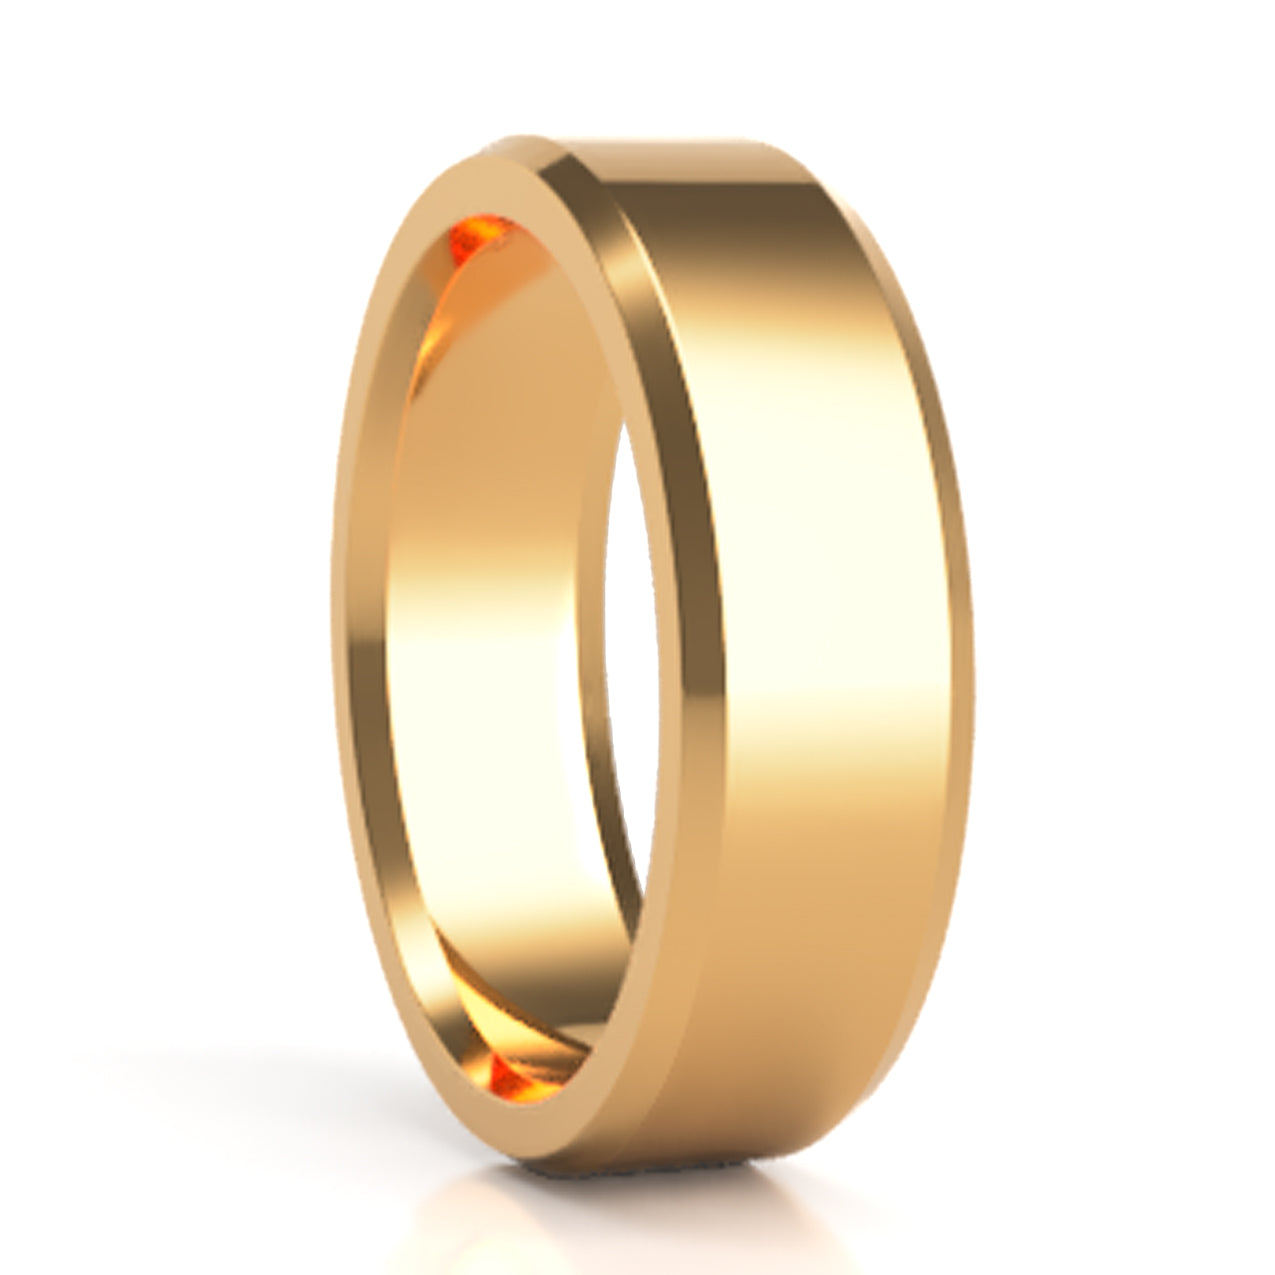 A 18k gold classic wedding band with beveled edges displayed on a neutral white background.